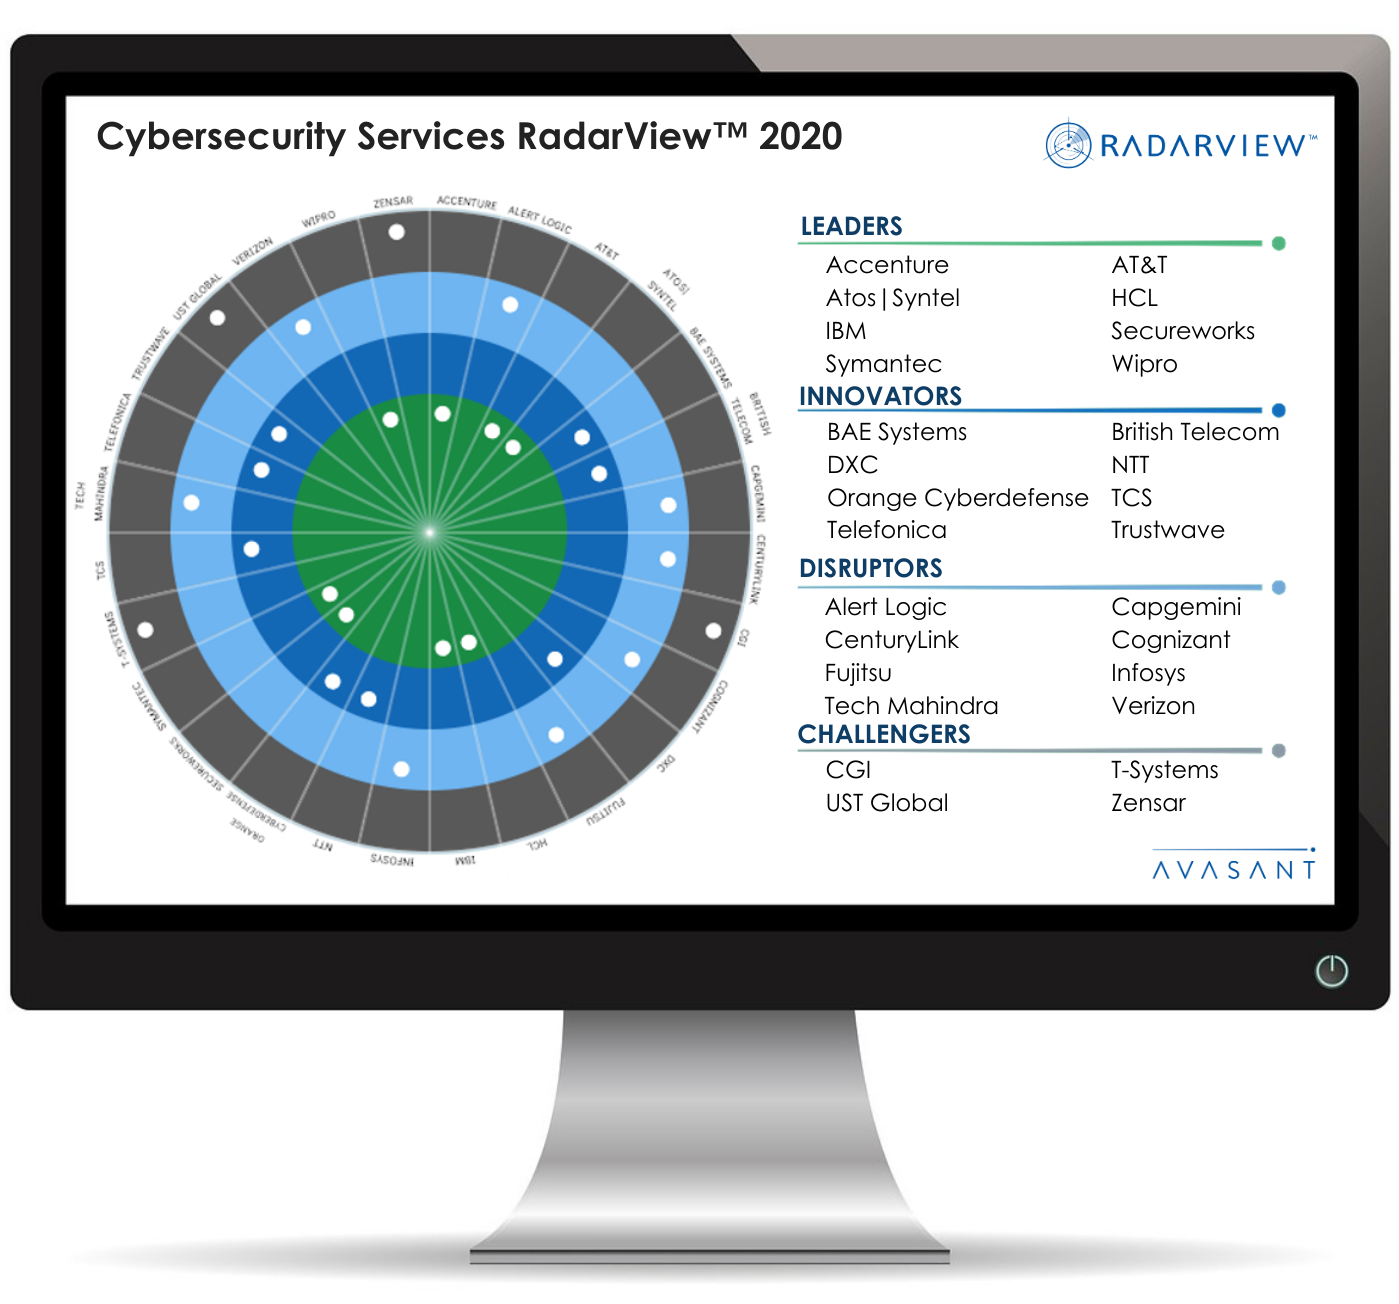 Cybersecurity RV 1 1 - Cybersecurity Services RadarView™ 2020 - BAE Systems